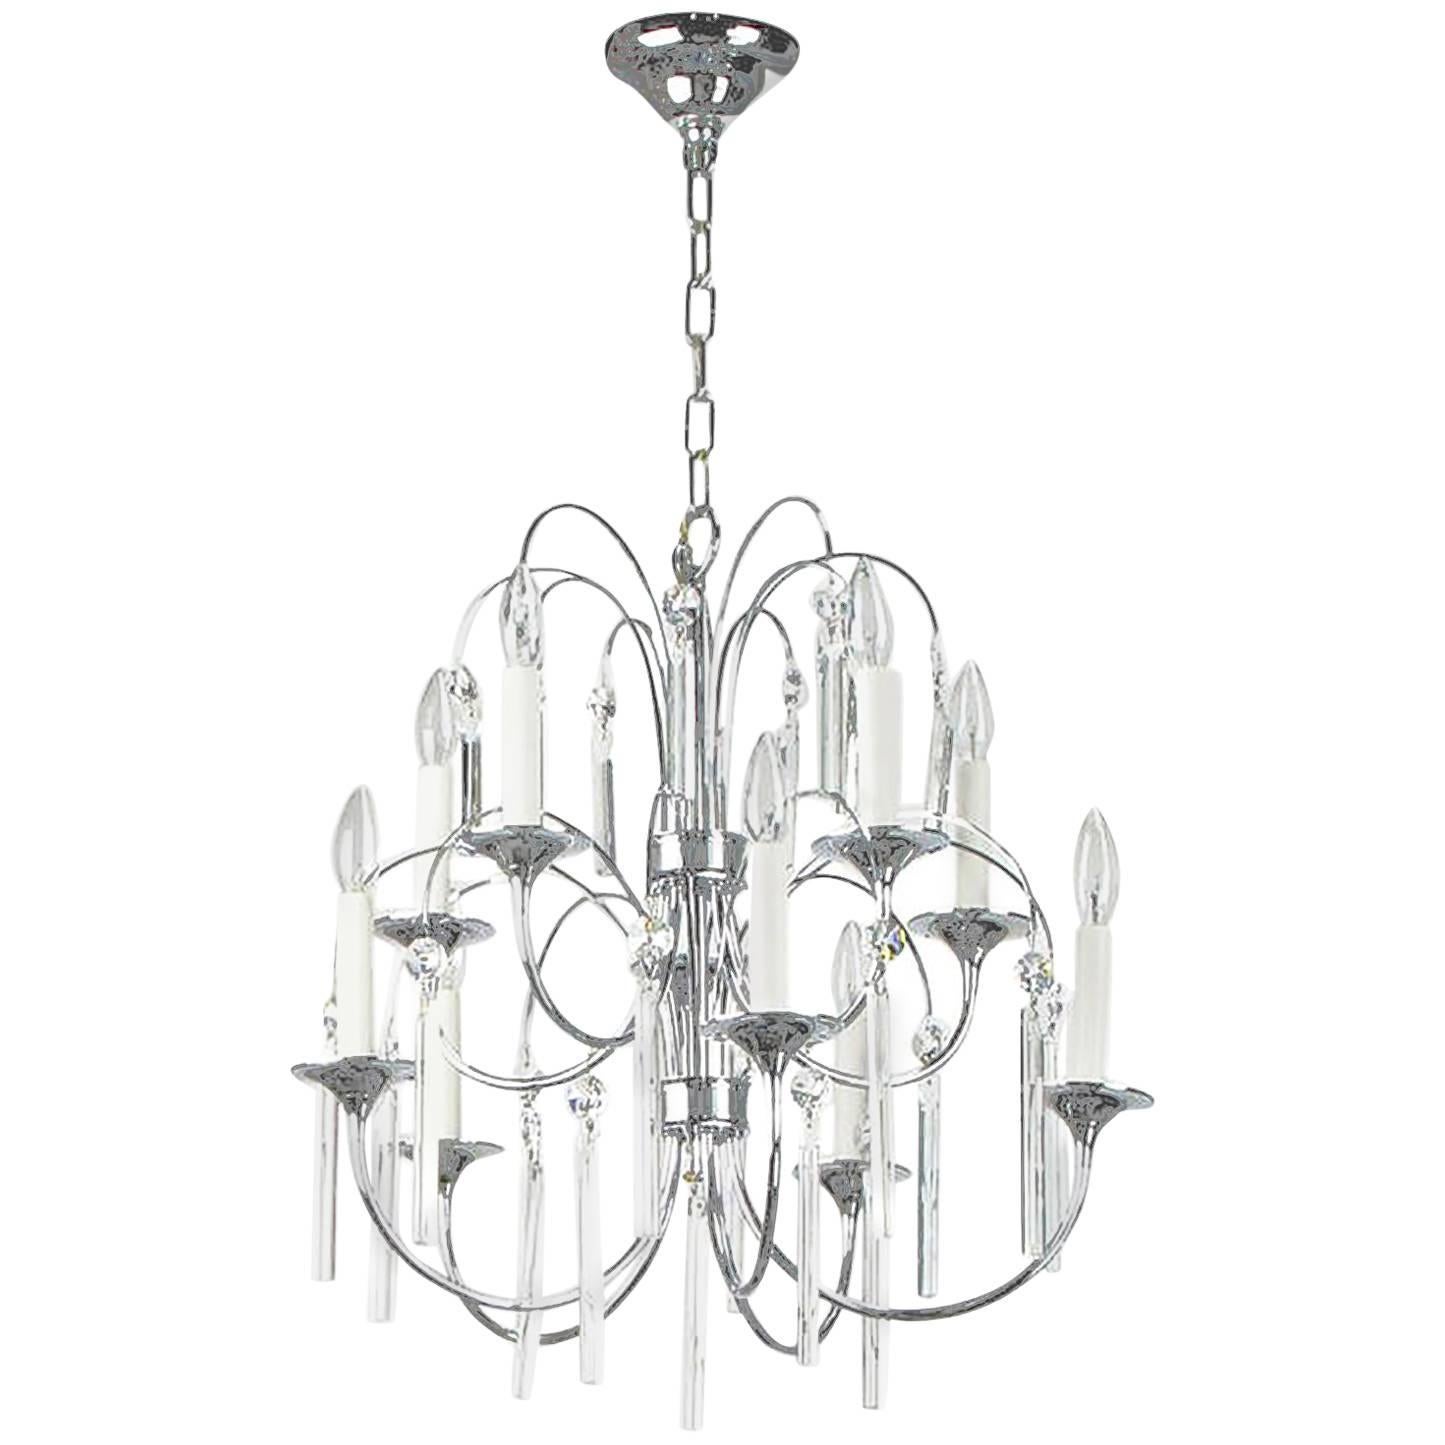 Italian Chrome and Crystal Ten-Arm Waterfall Chandelier For Sale